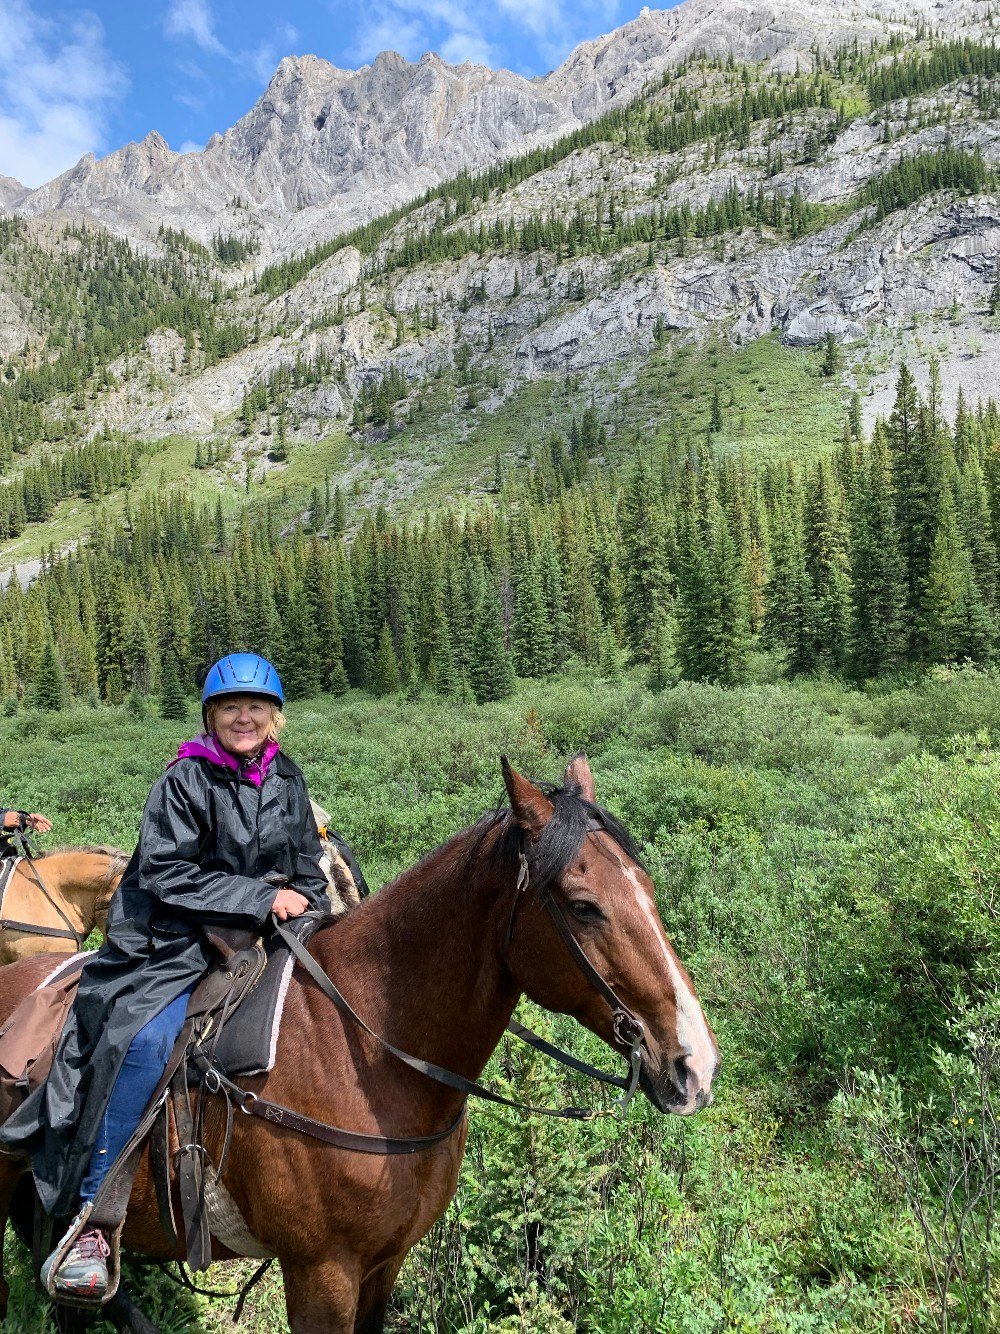 Isabel on horseback in the countryside of Southern Alberta